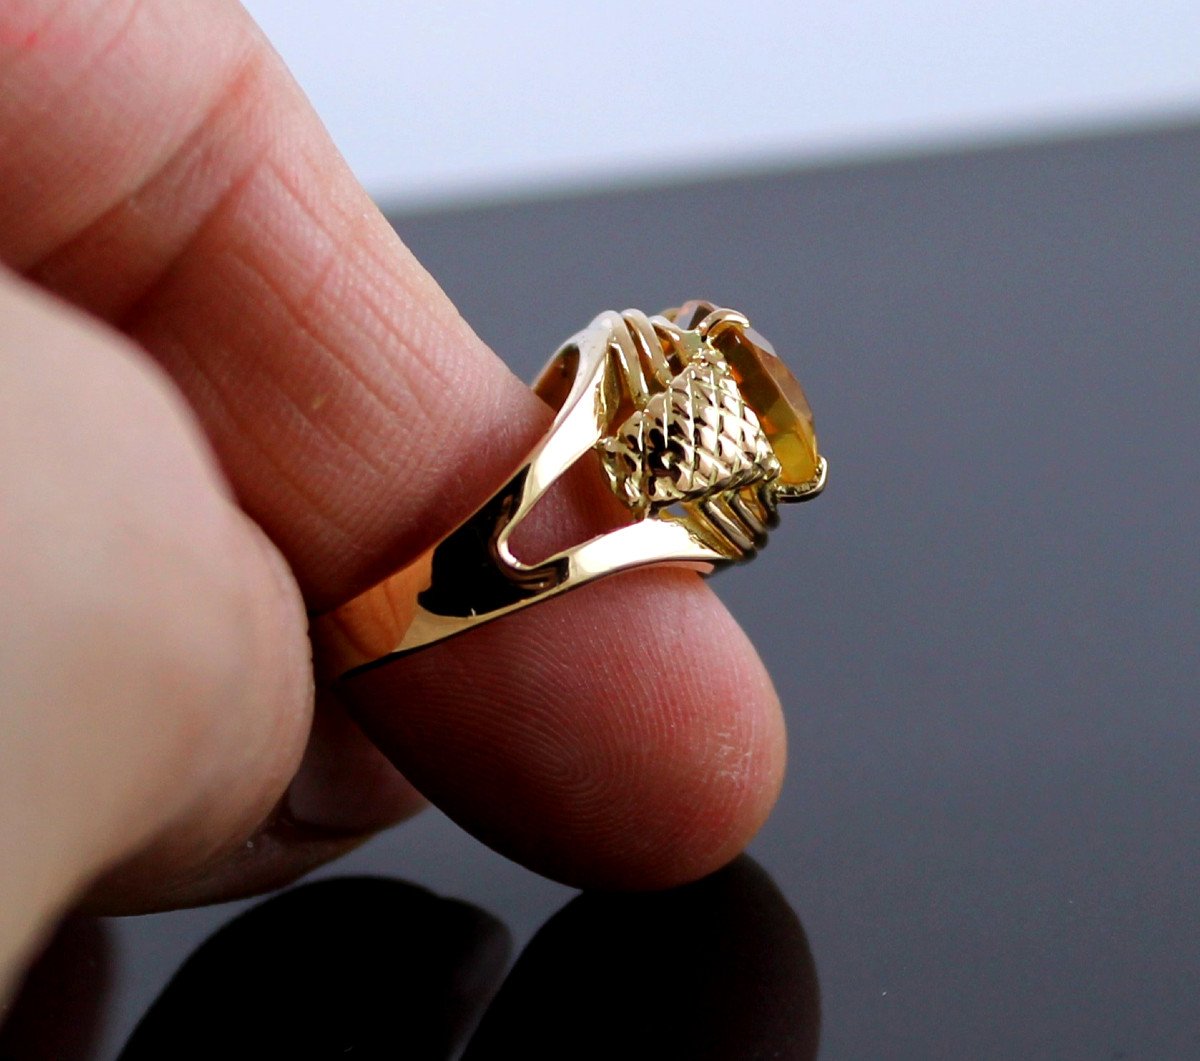 Gold And Citrine Ring-photo-4